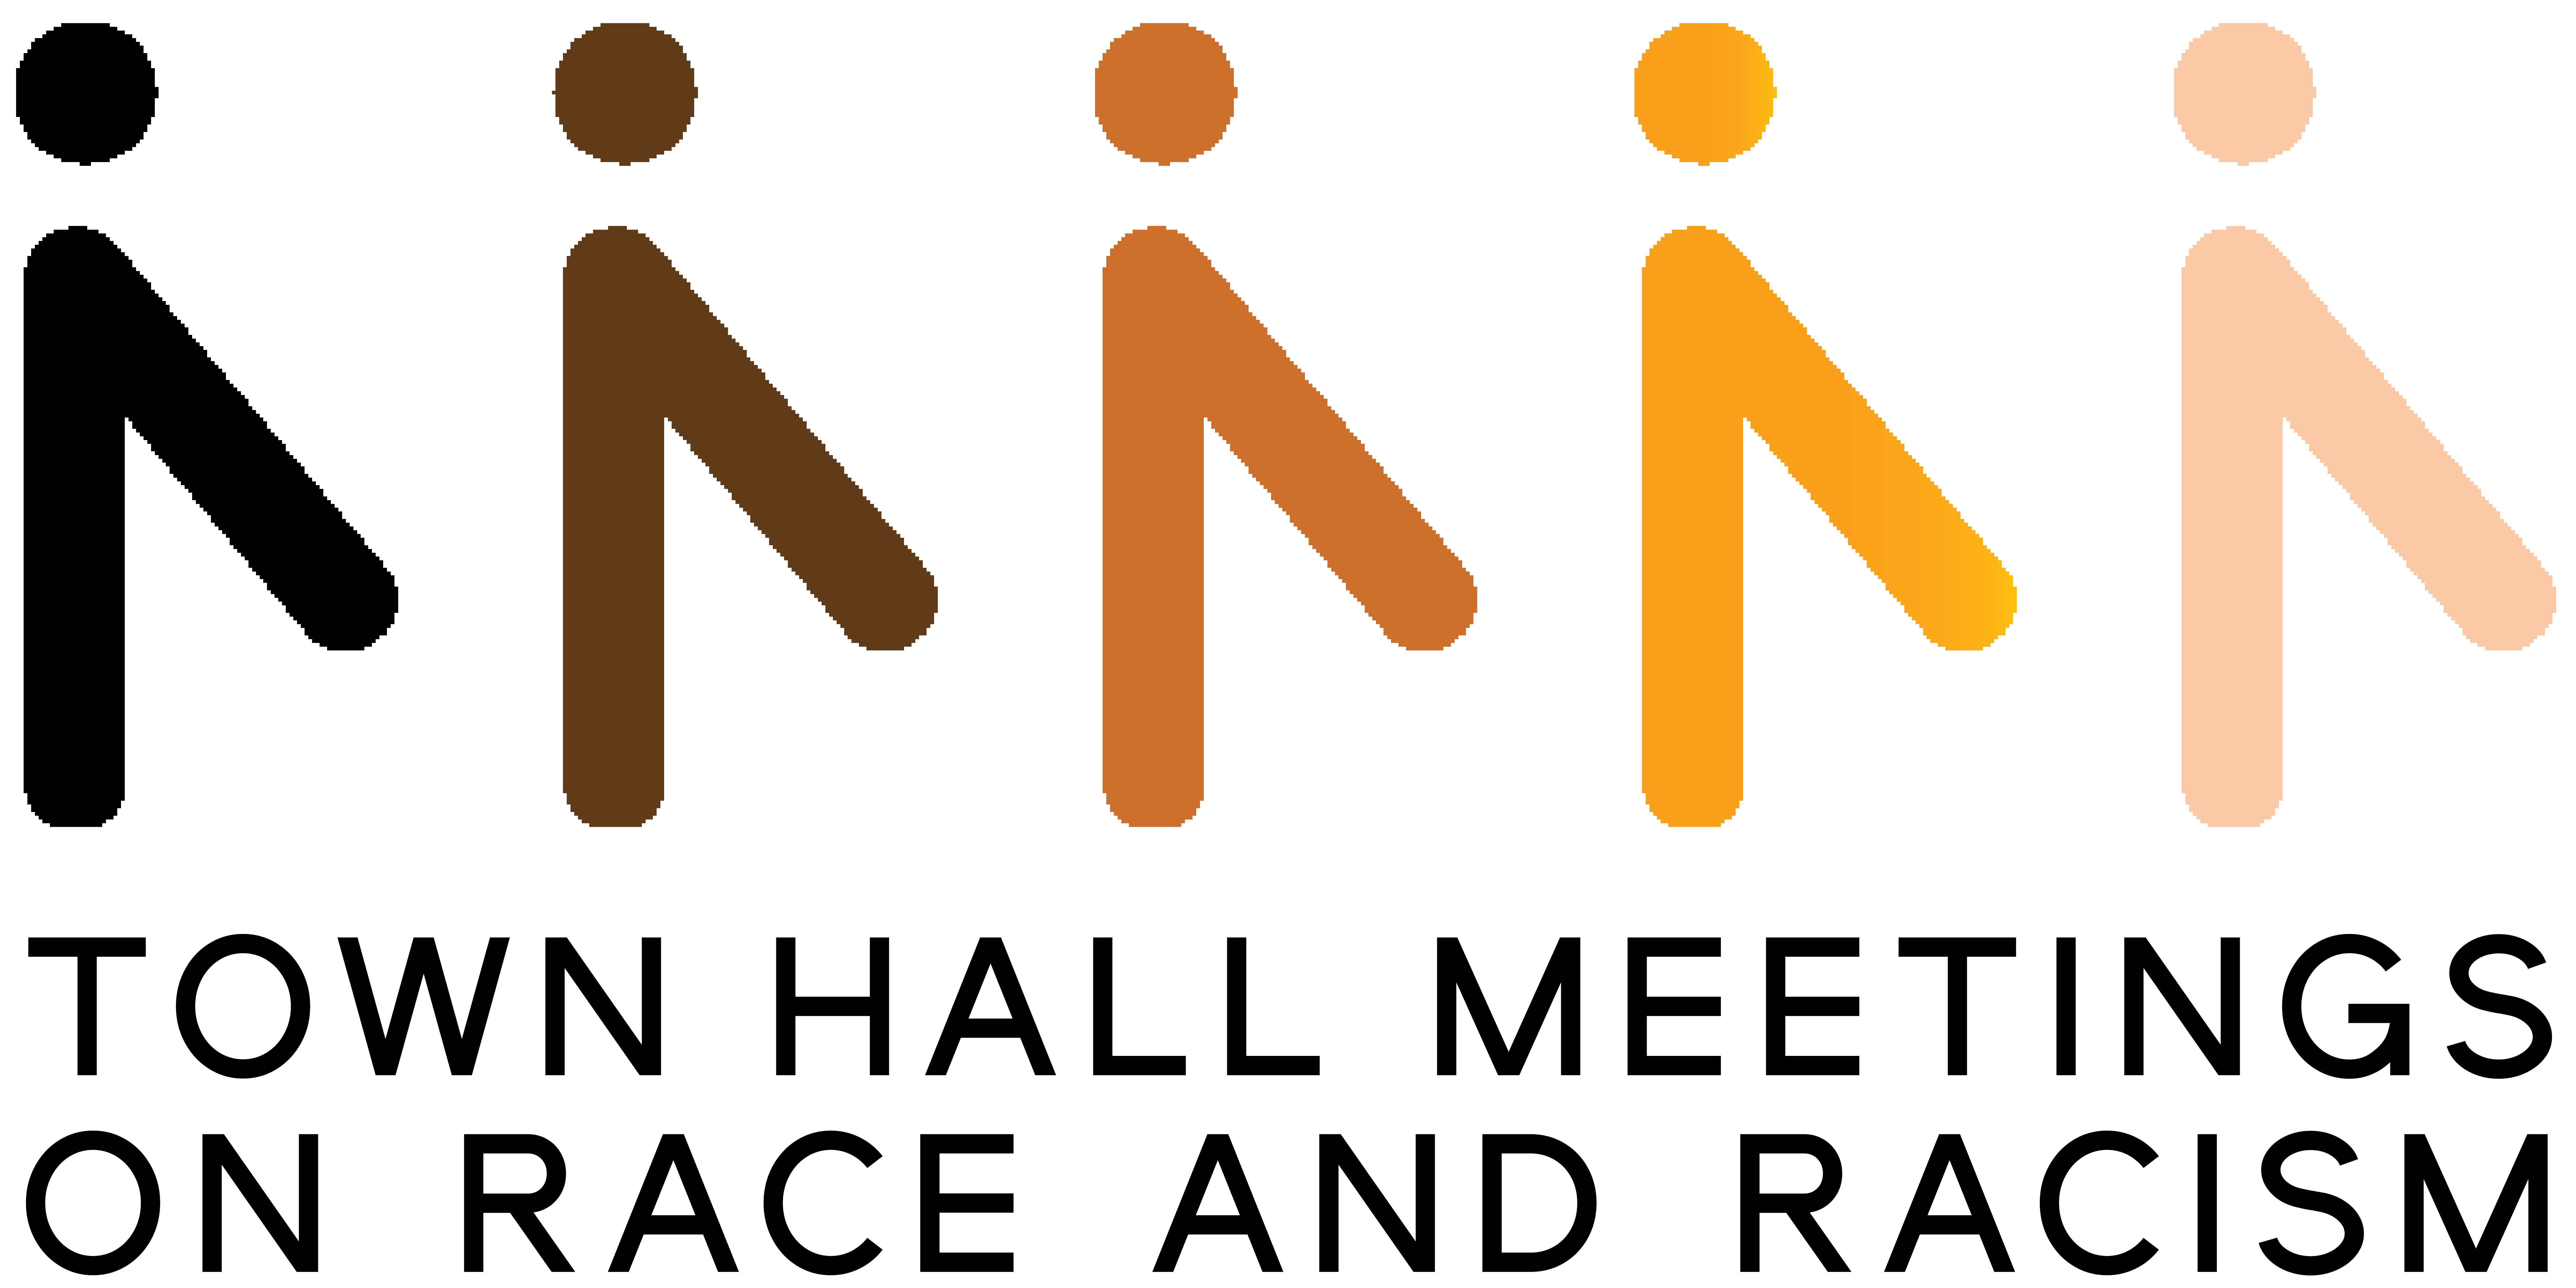 The (Anti)Racism Task Force will host a series of townhall meetings on race and racism.